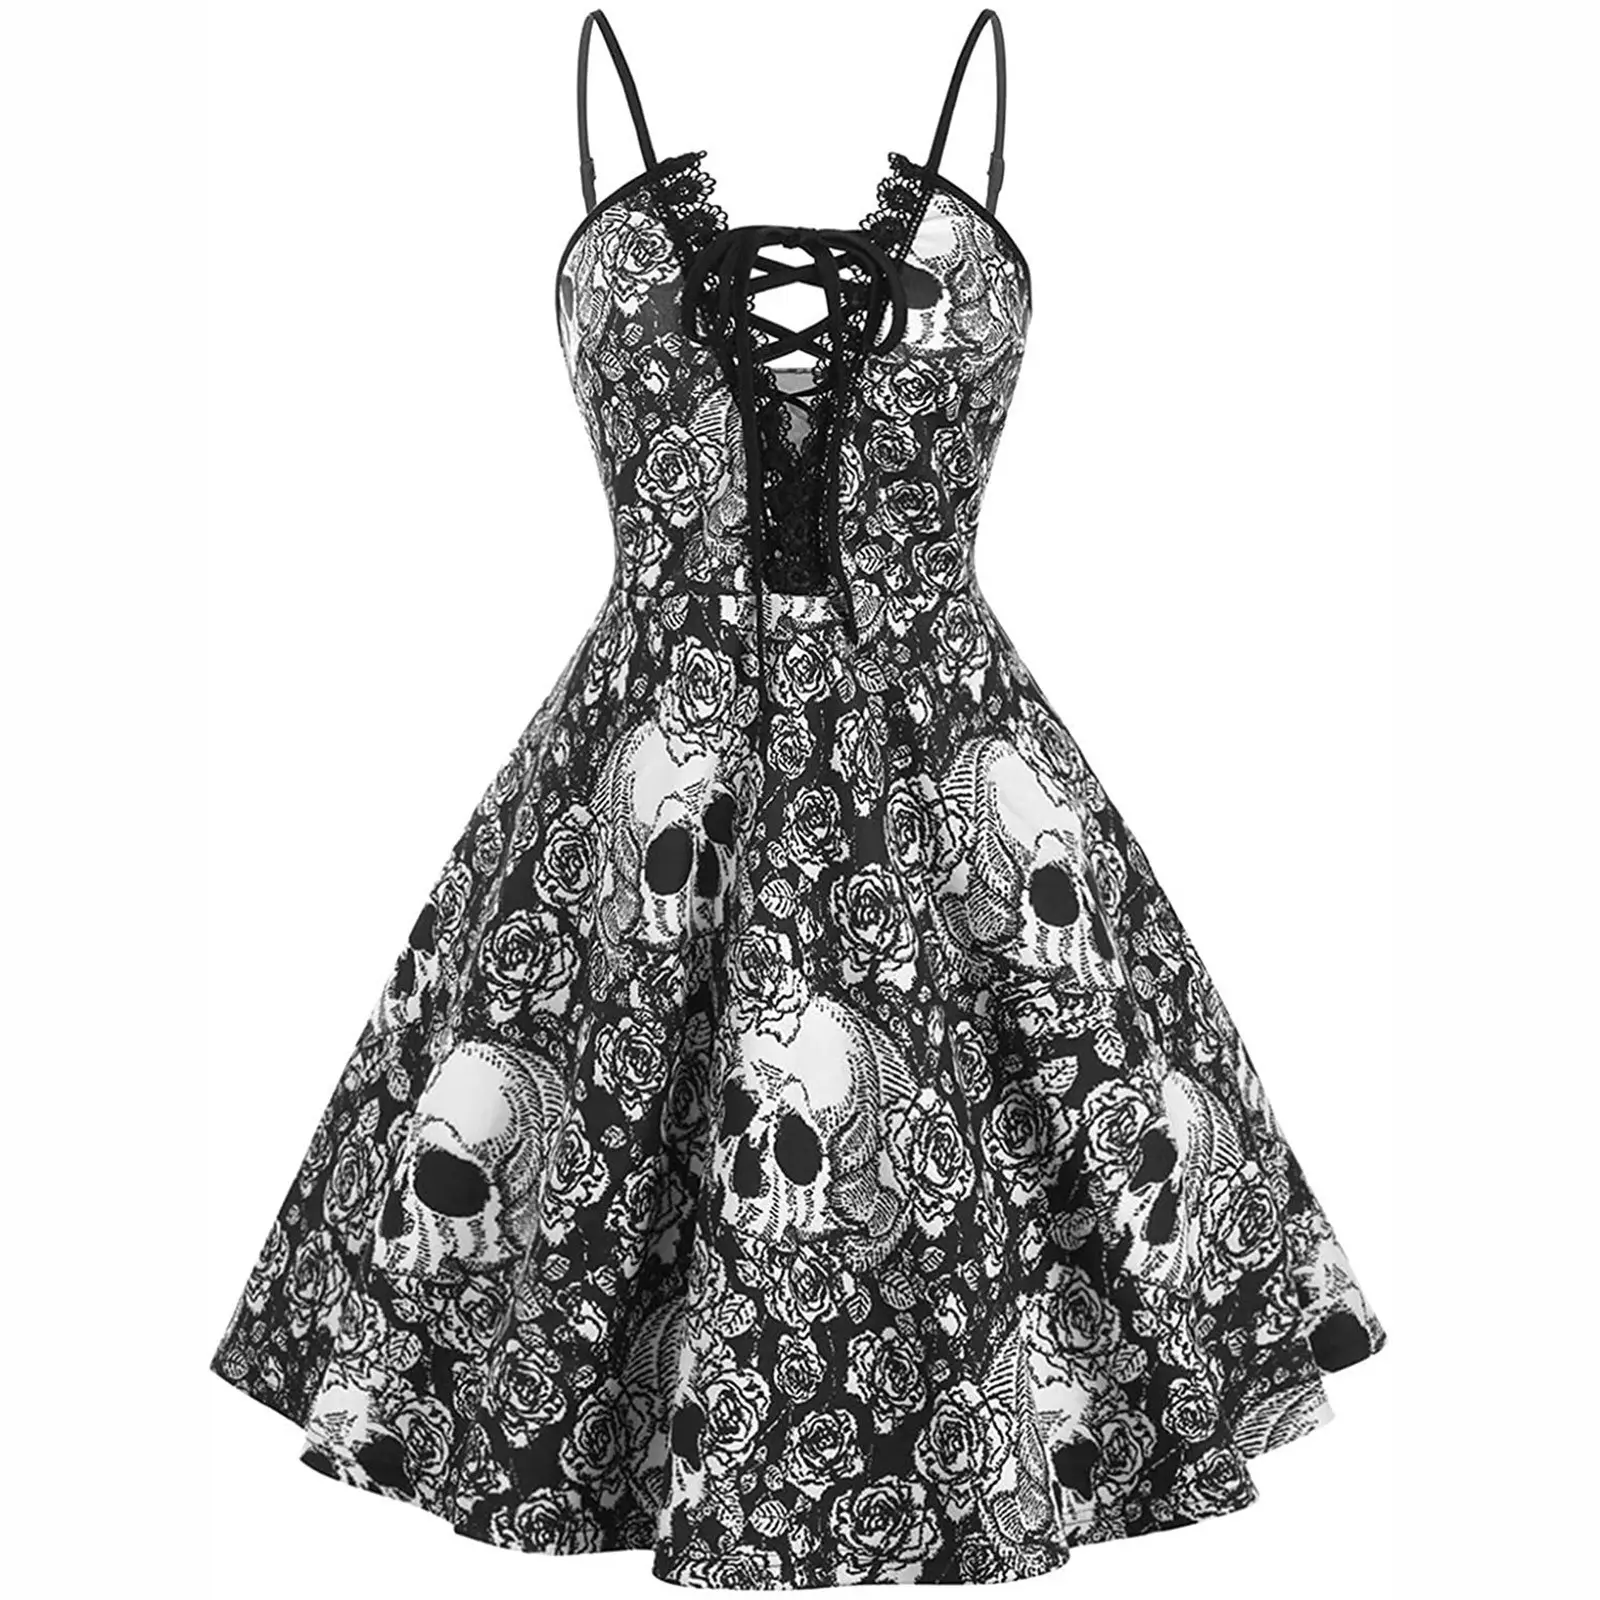 Women's 50s Vintage Rockabilly Dresses Lady Sleeveless Retro Floral Midi skull Casual Cocktail Tea Party Evening Prom Dresses